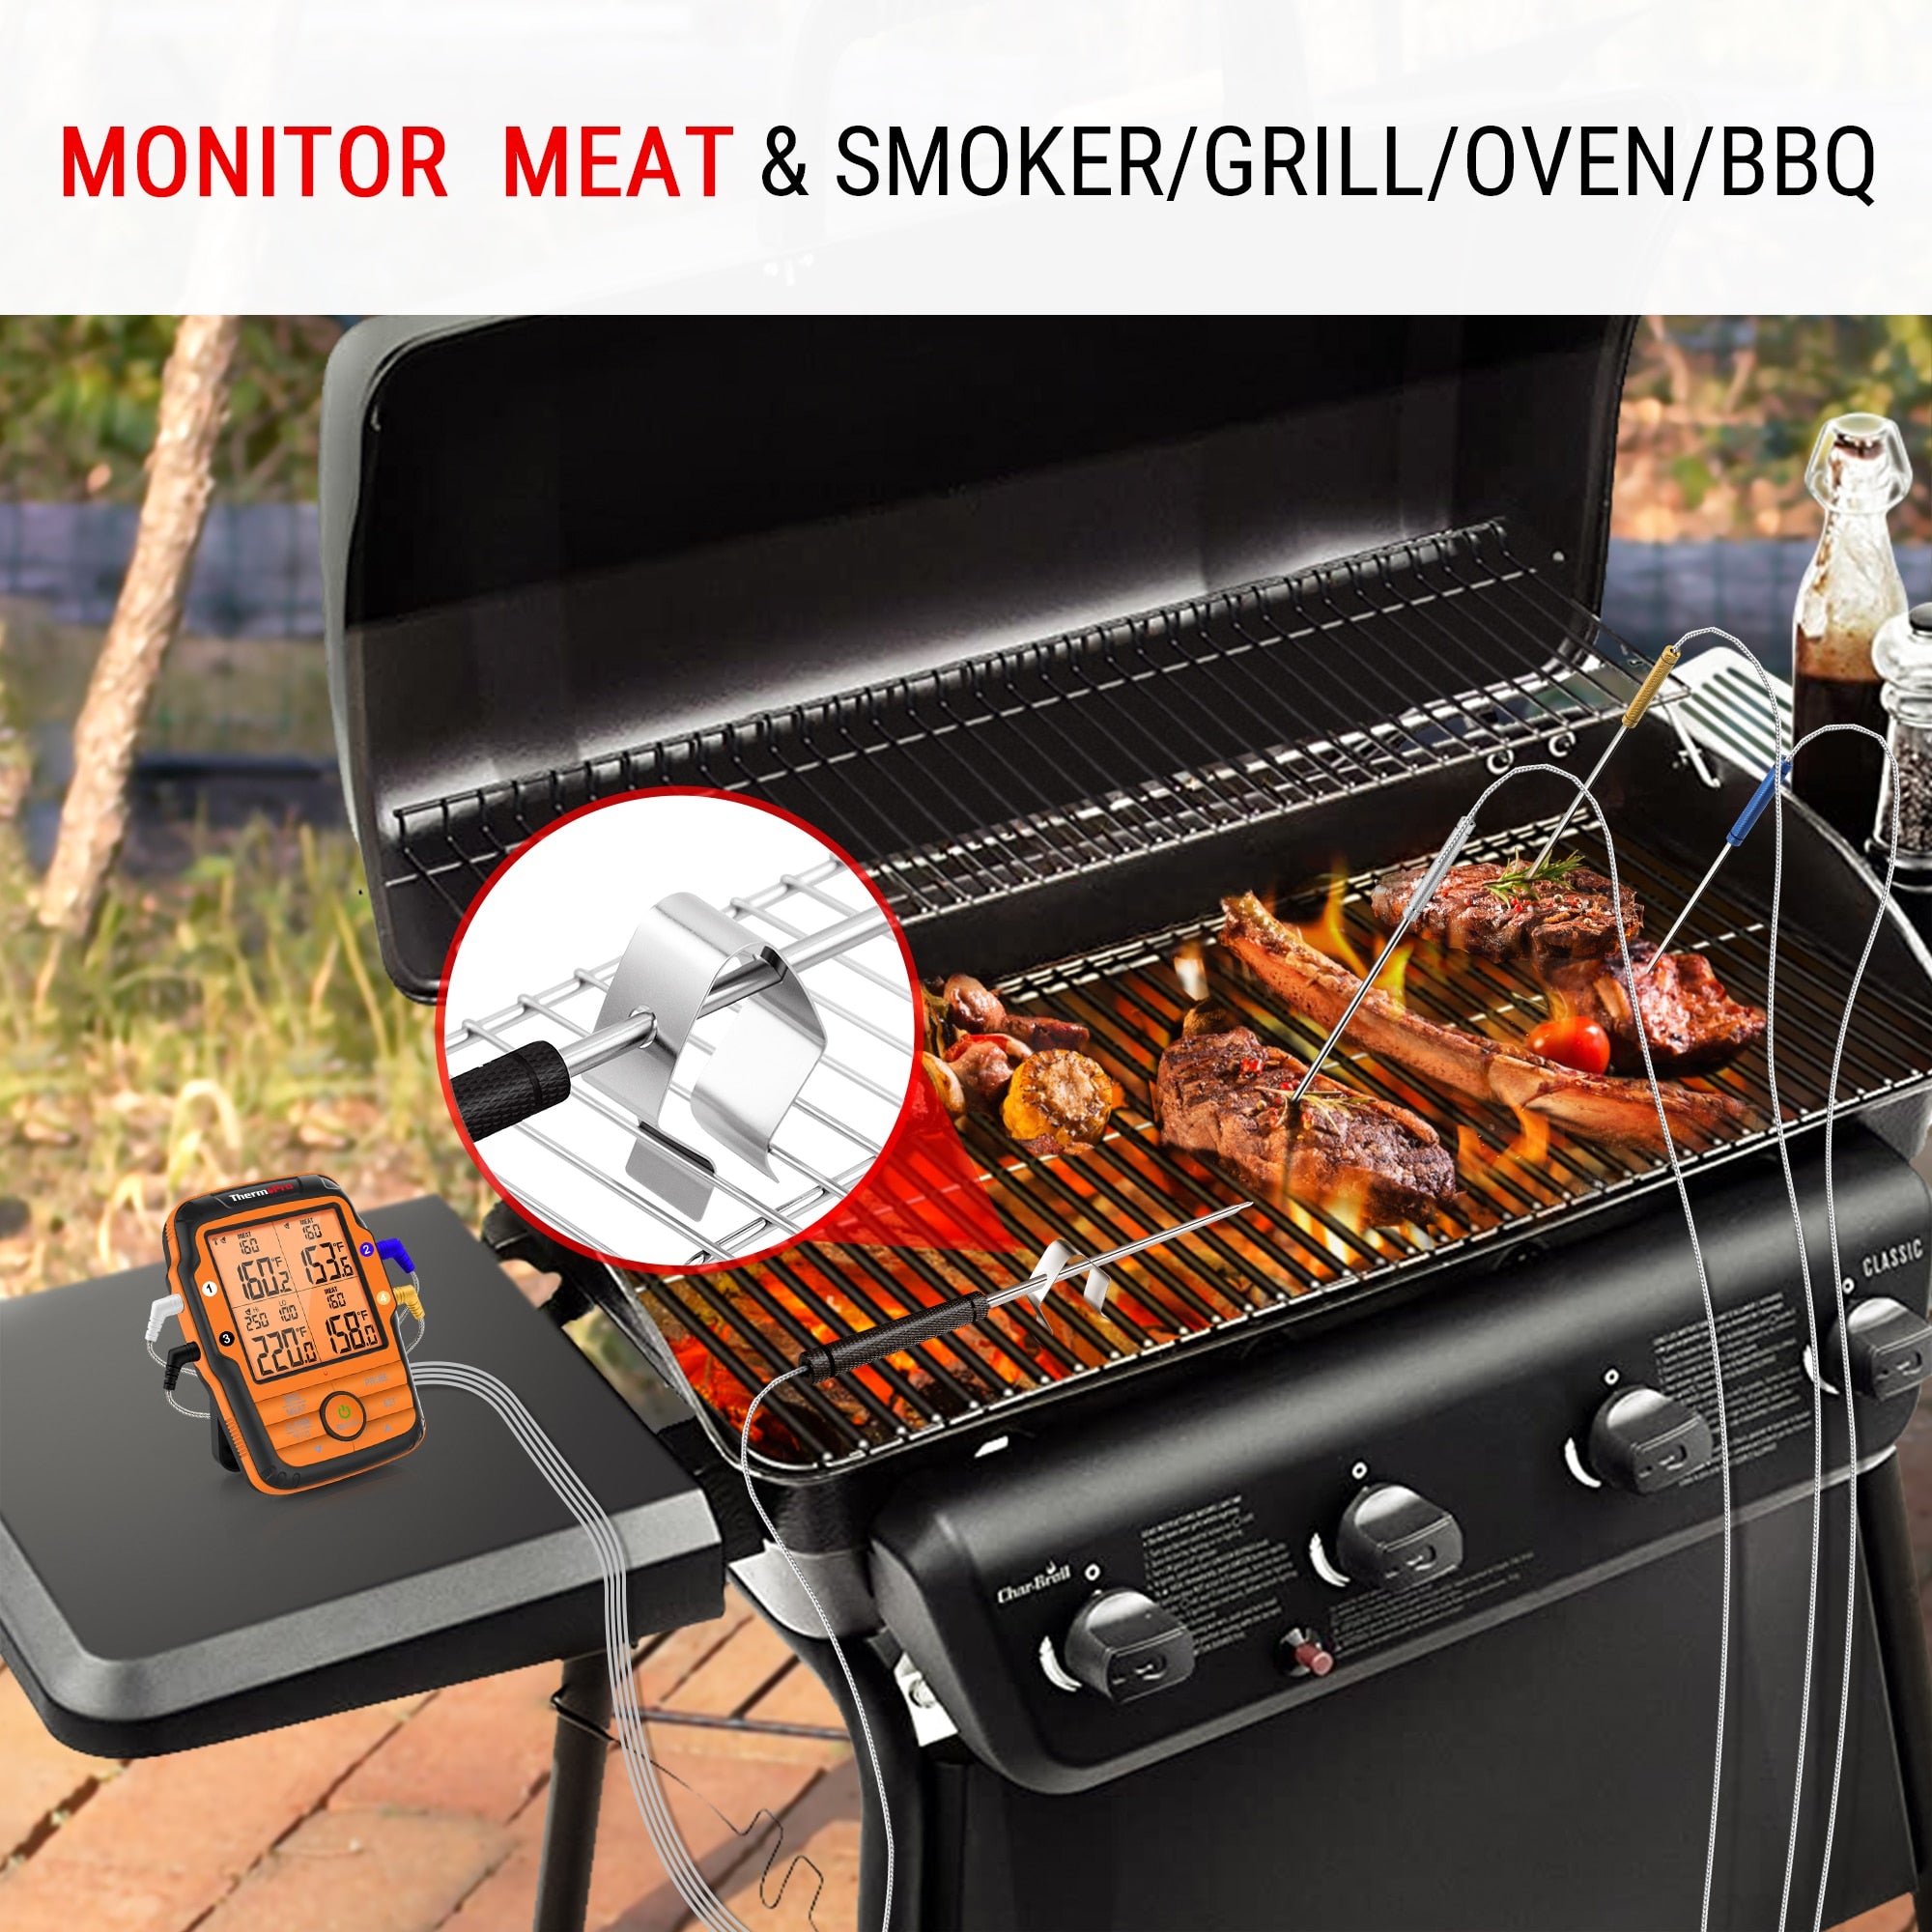 ThermoPro TP27C 150M Wireless Remote Range Backlight Large LCD Display –  Grillin' Shit